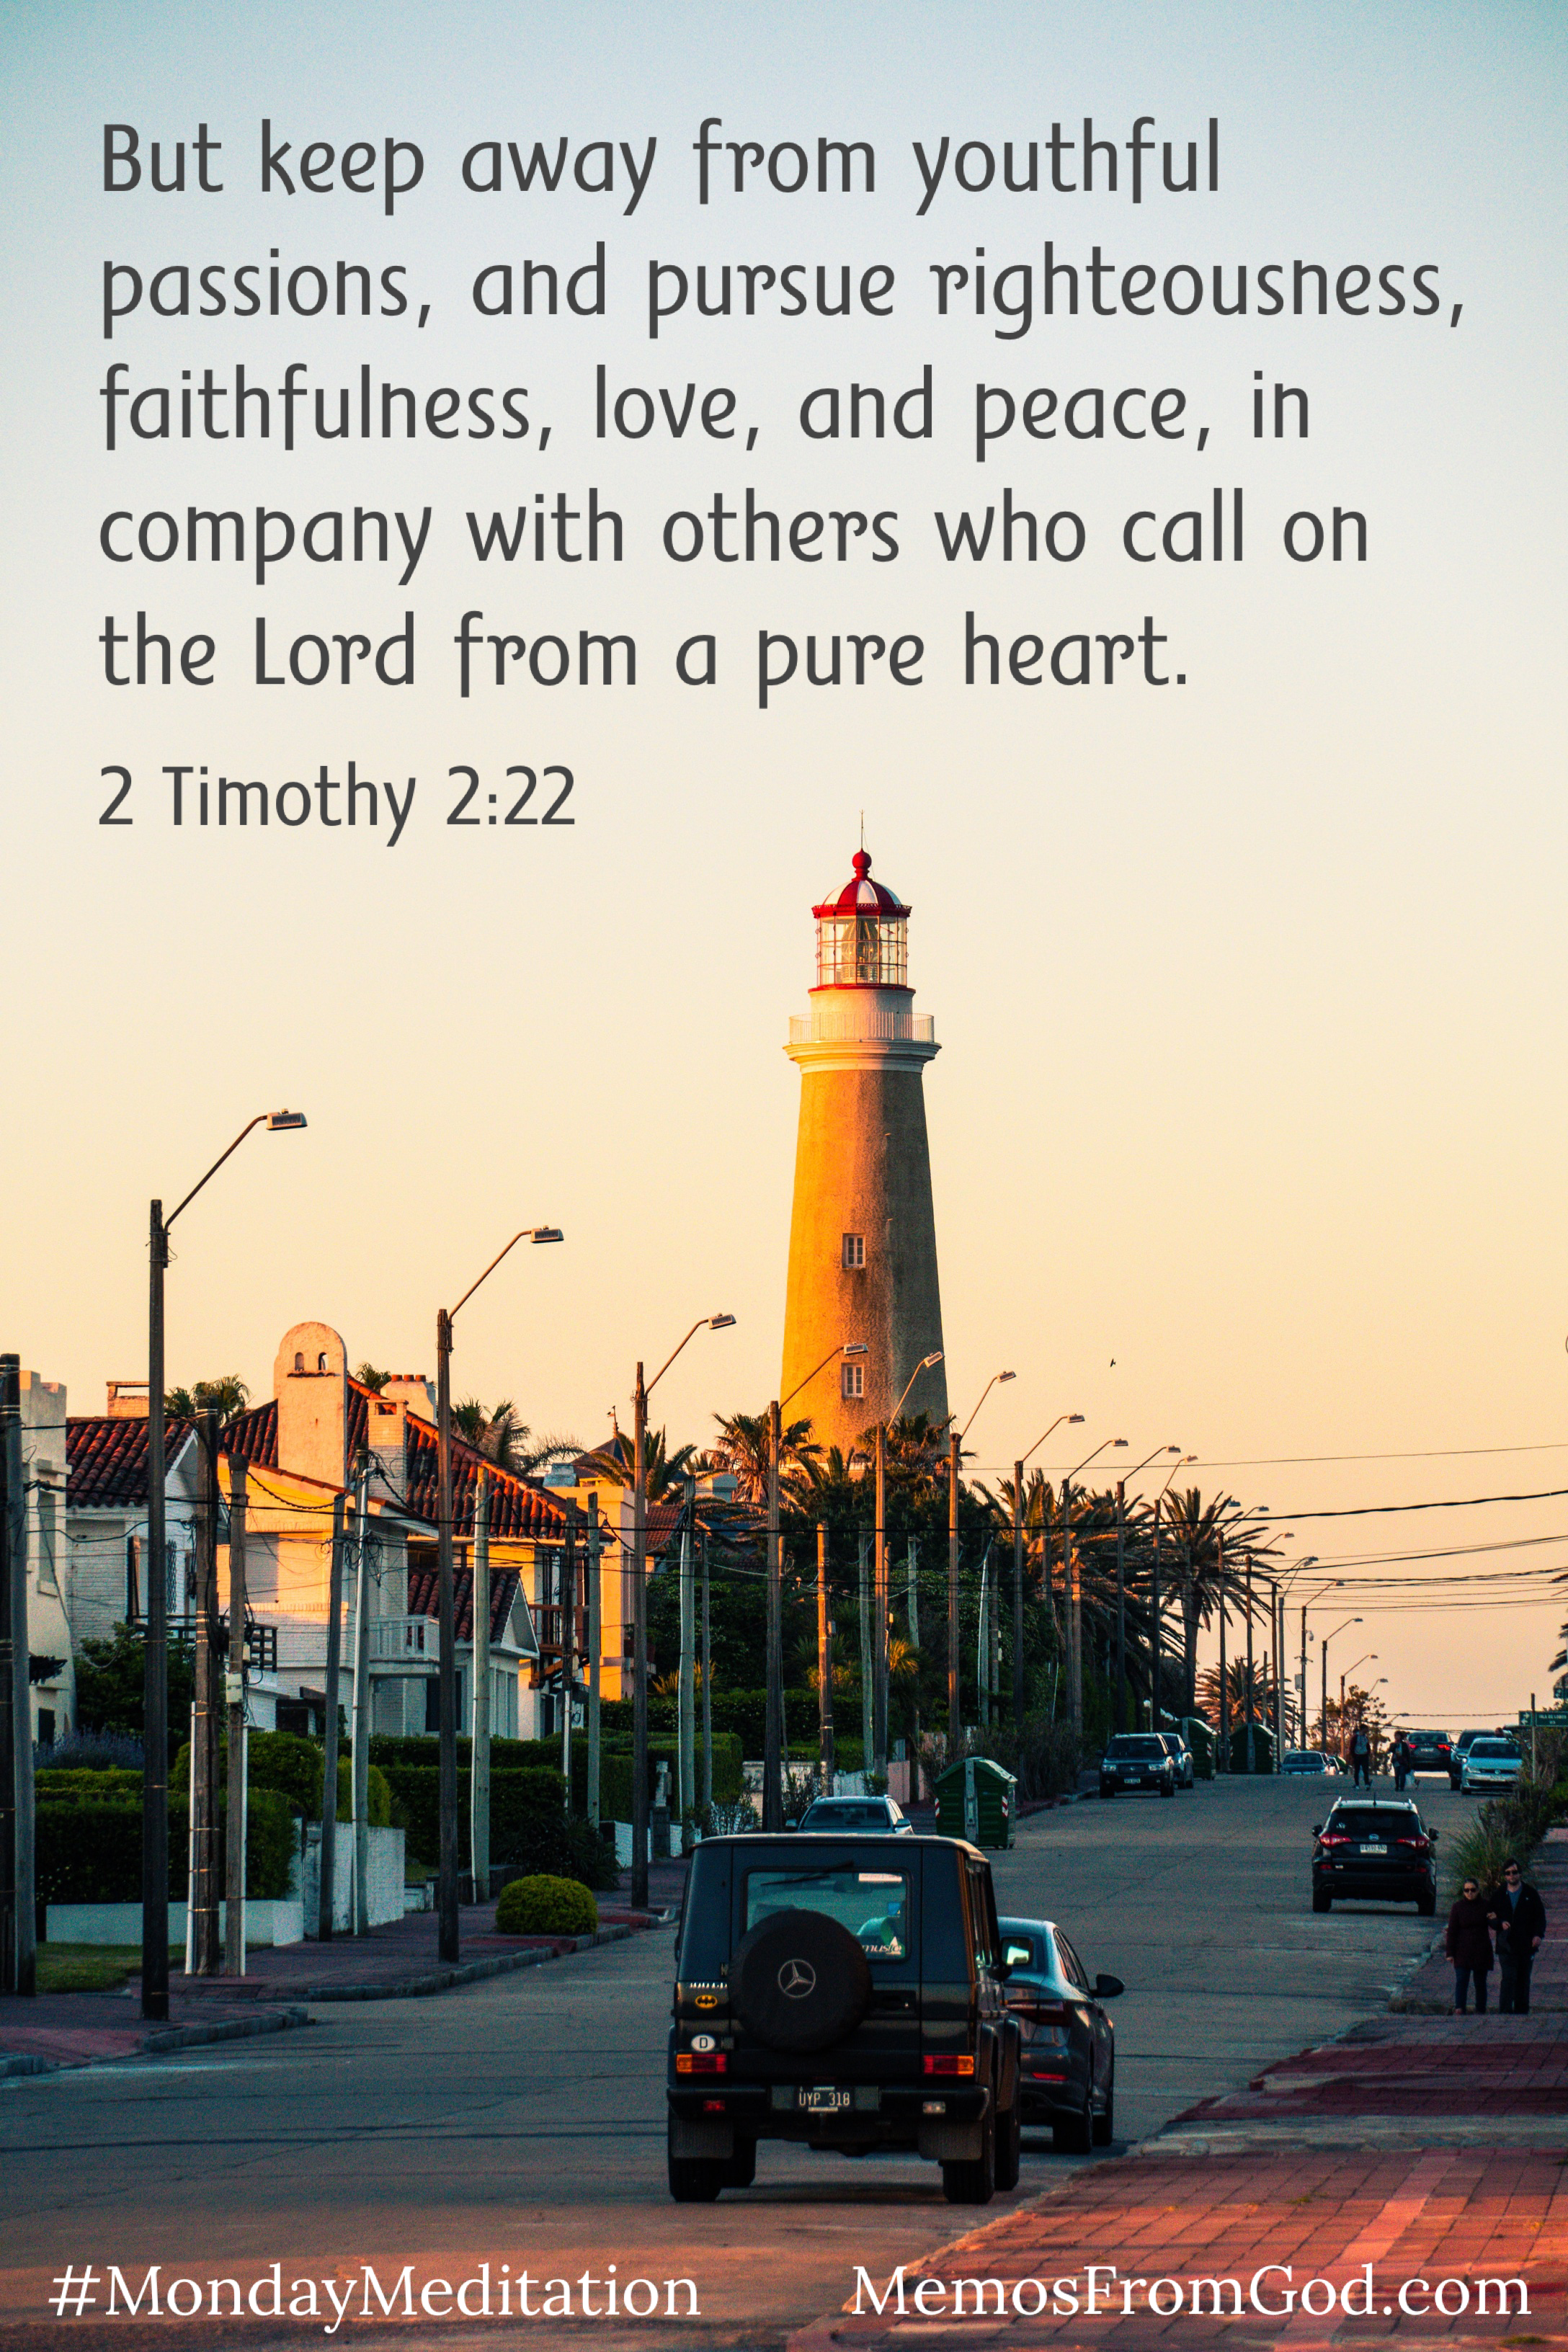 A tall, robust lighthouse can be seen beyond the houses and cars of a busy residential street. Caption: But keep away from youthful passions, and pursue righteousness, faithfulness, love, and peace, in company with others who call on the Lord from a pure heart. 2 Timothy 2:22